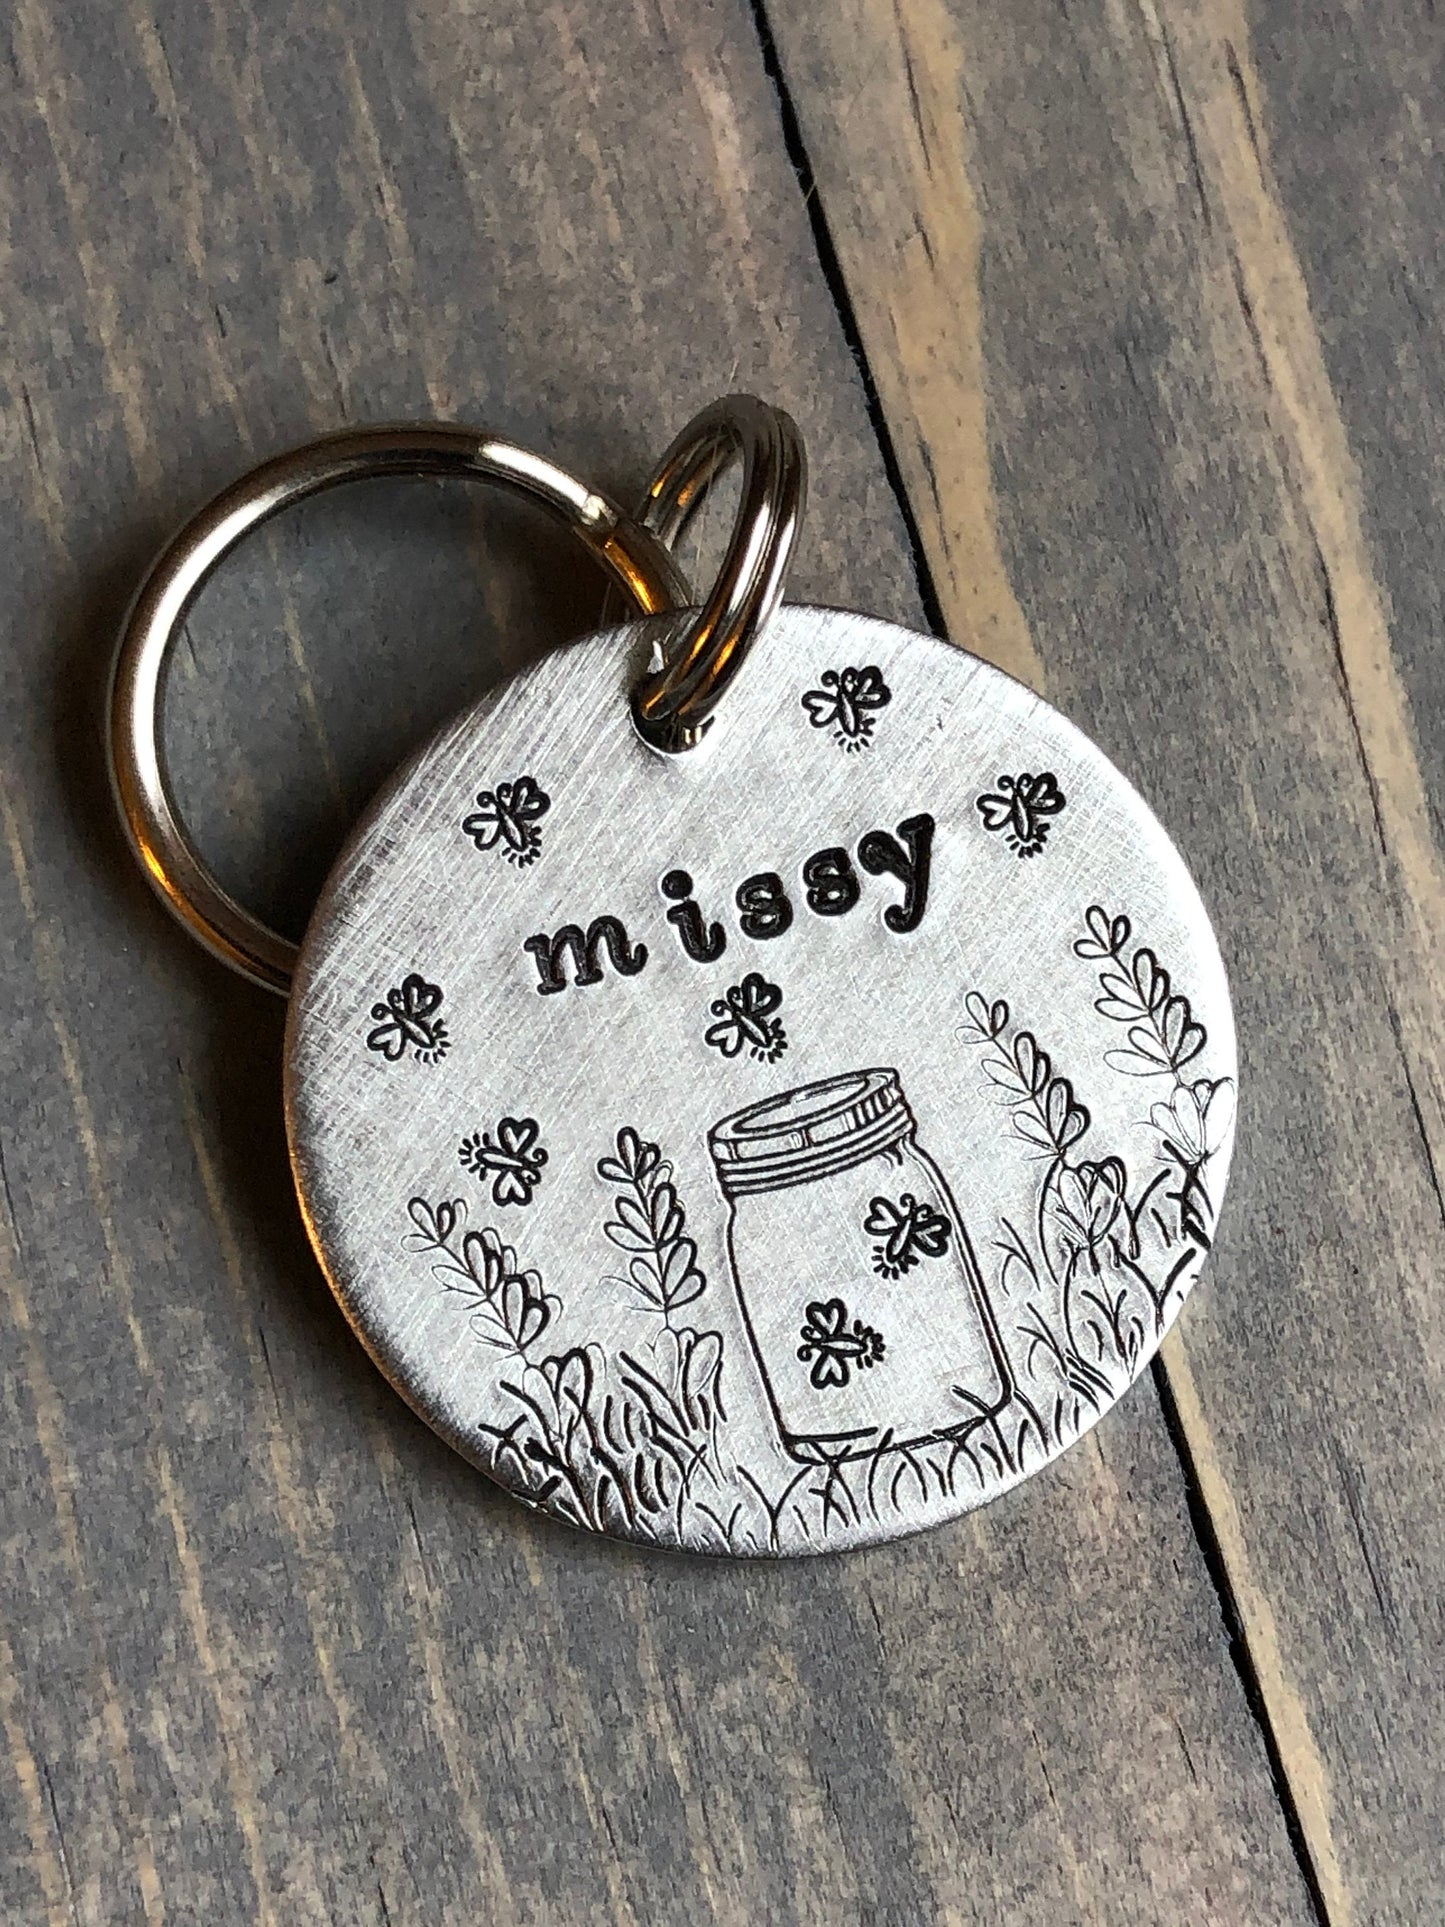 Dog Tag Personalized, Dog Tags for Dogs, Dog Tag, Firefly, Pet ID Tag, Custom Dog Tag